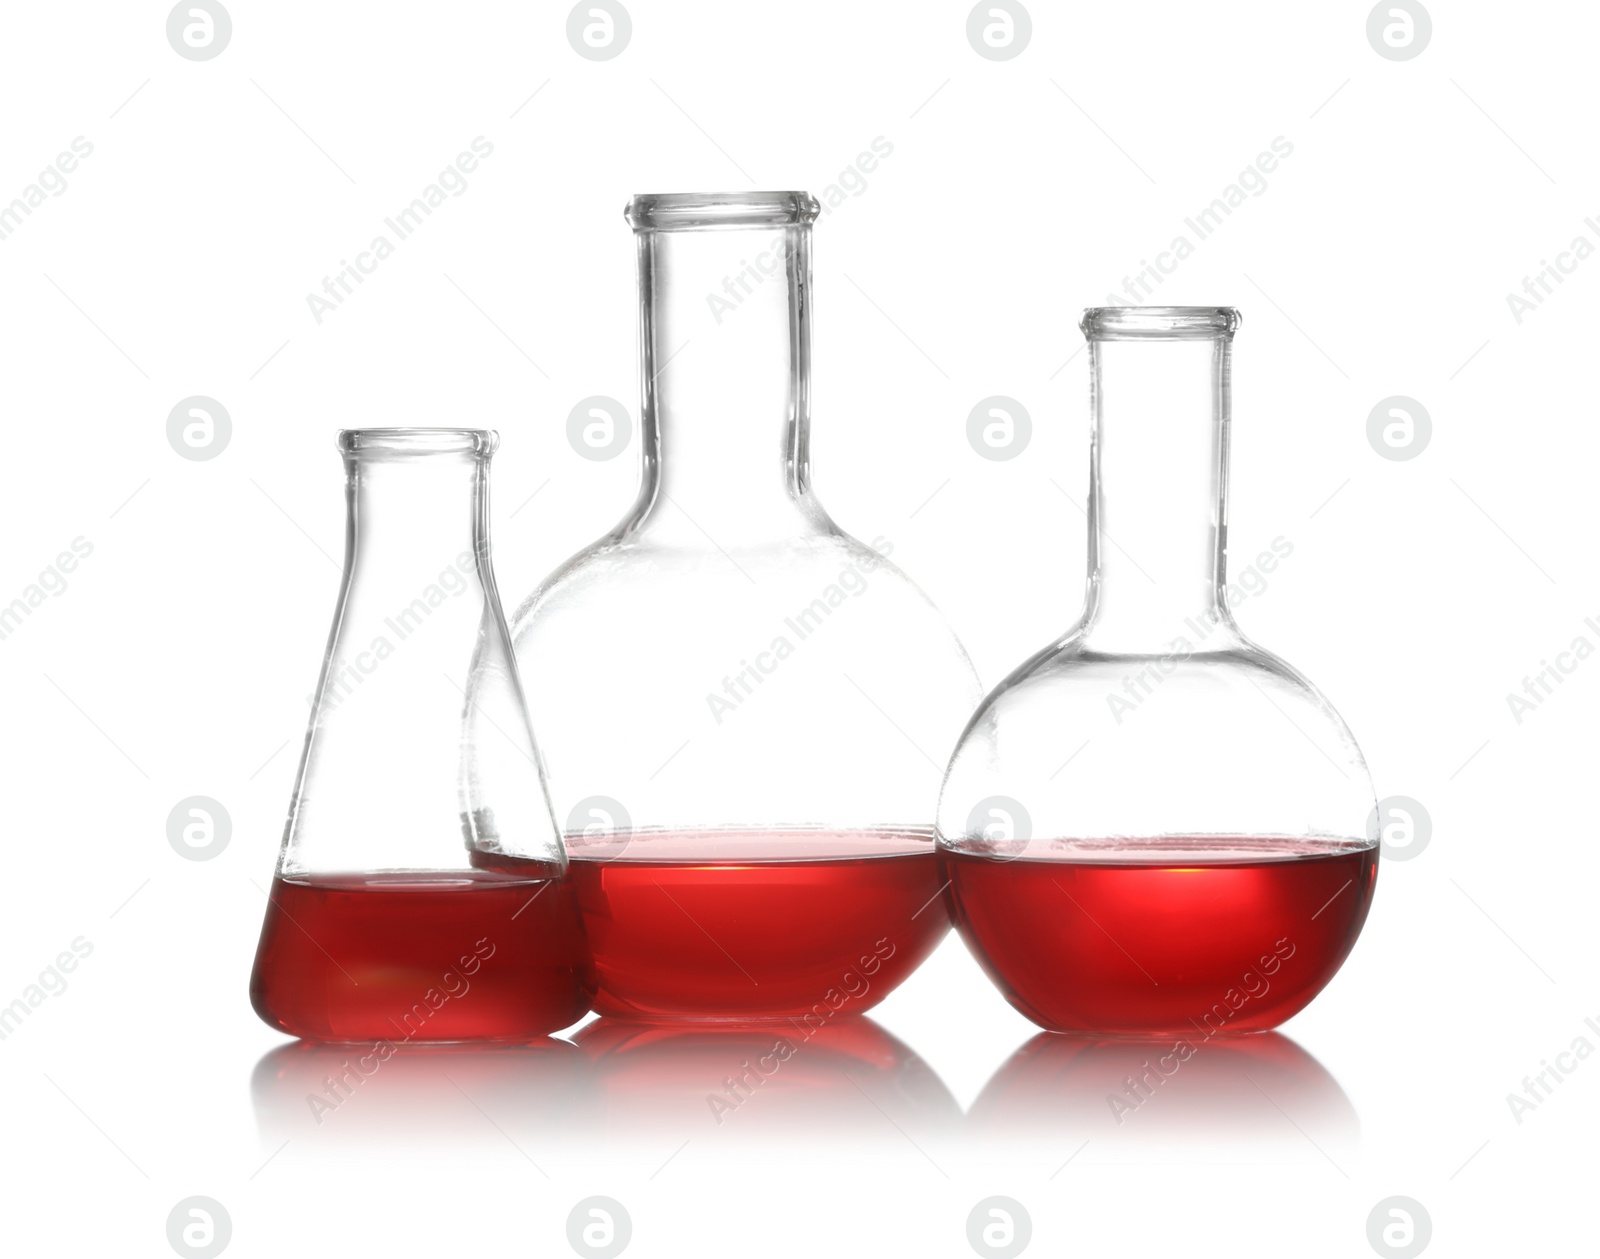 Photo of Group of chemistry glassware with liquid samples isolated on white